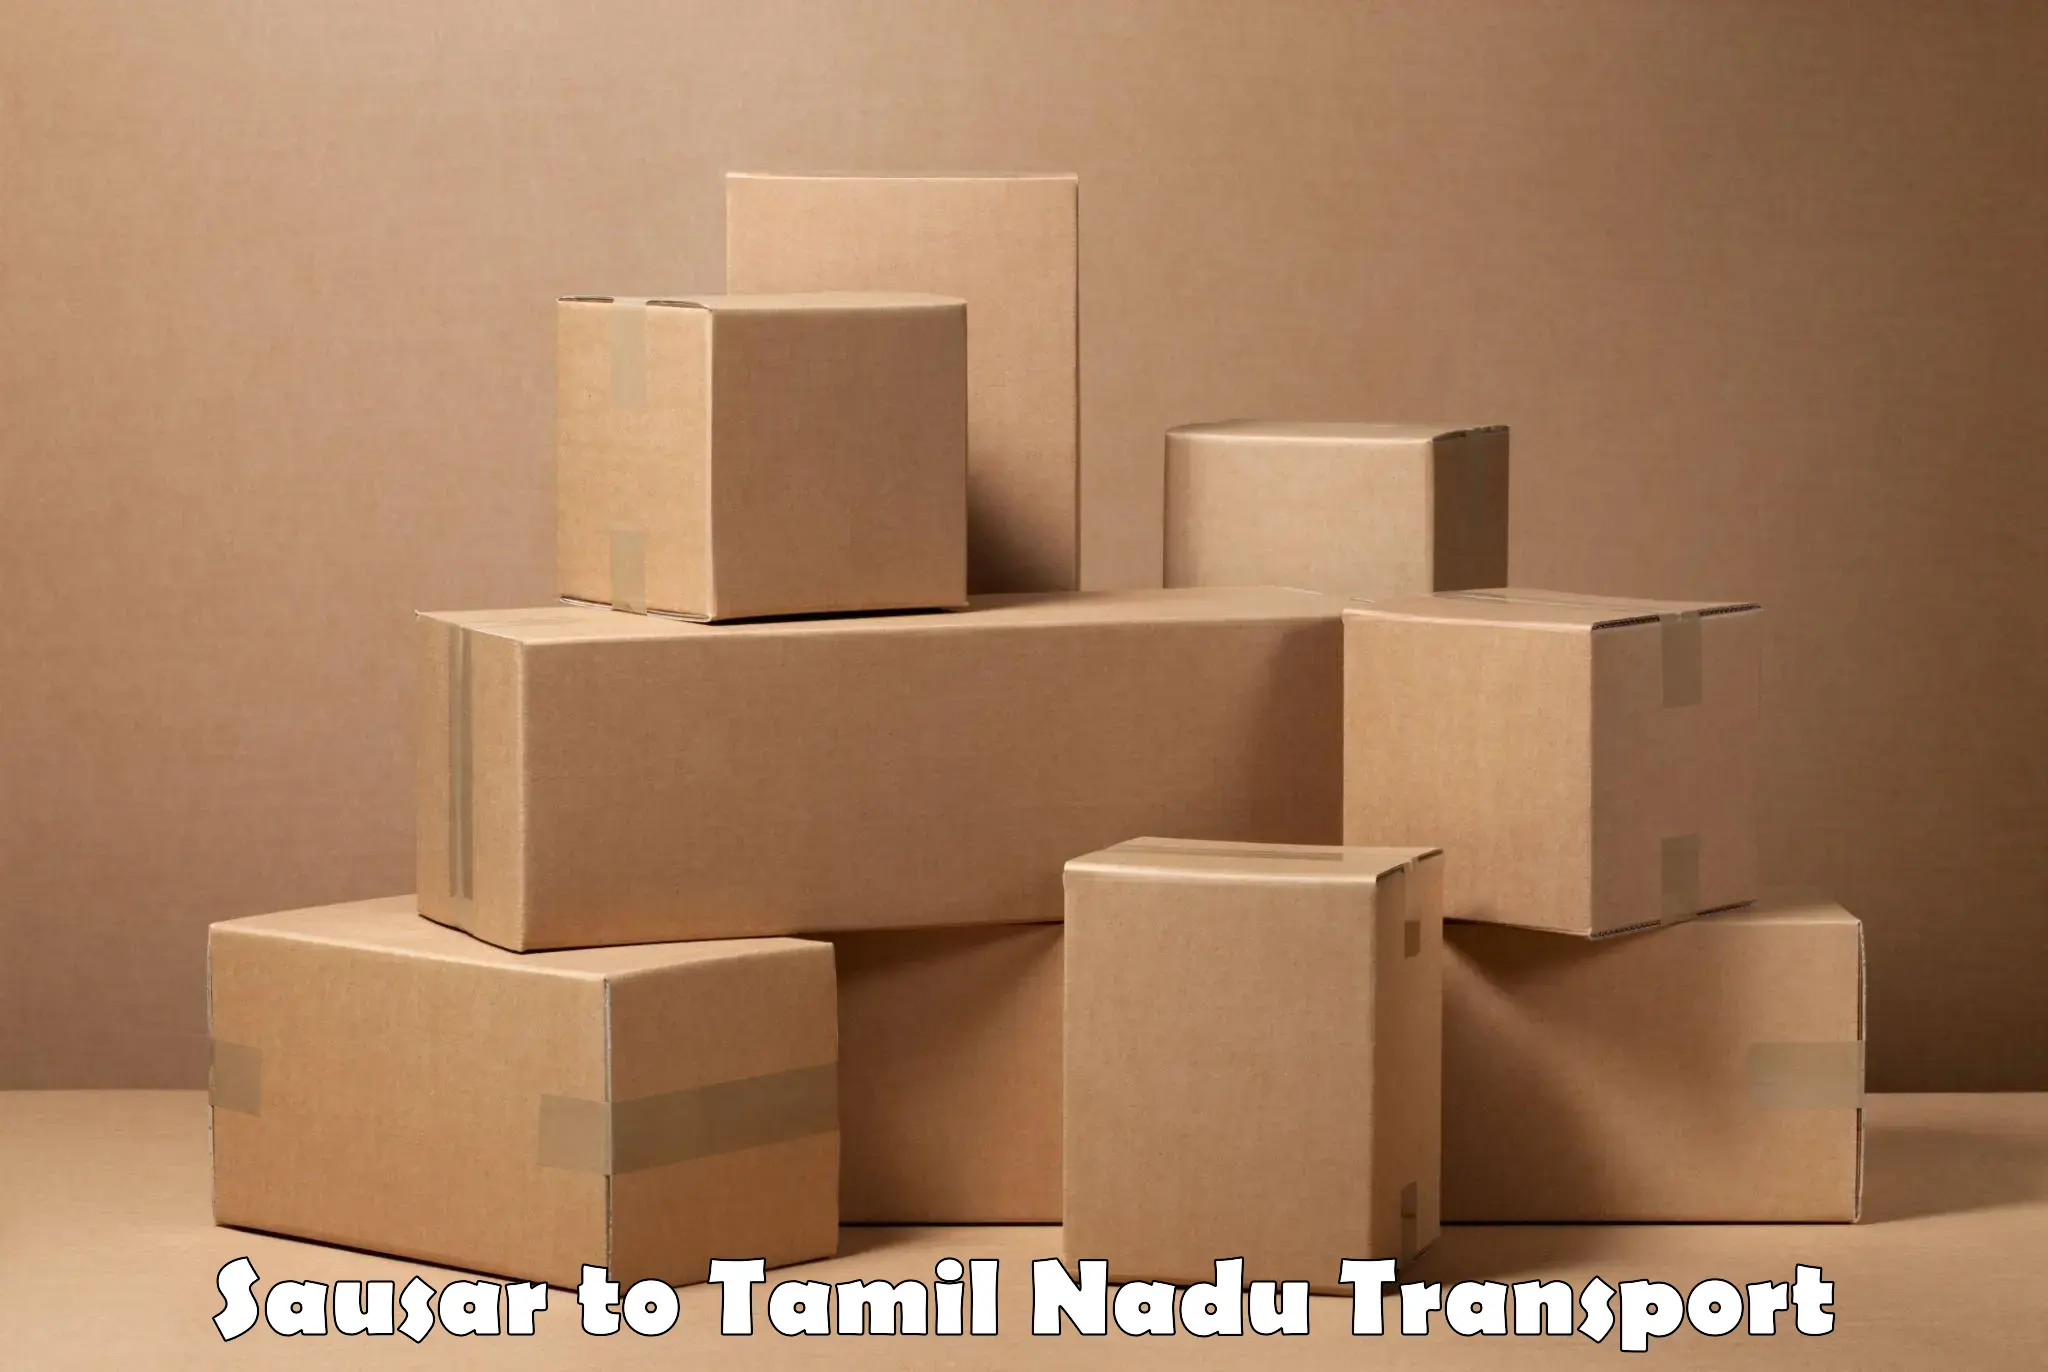 Commercial transport service Sausar to Tindivanam